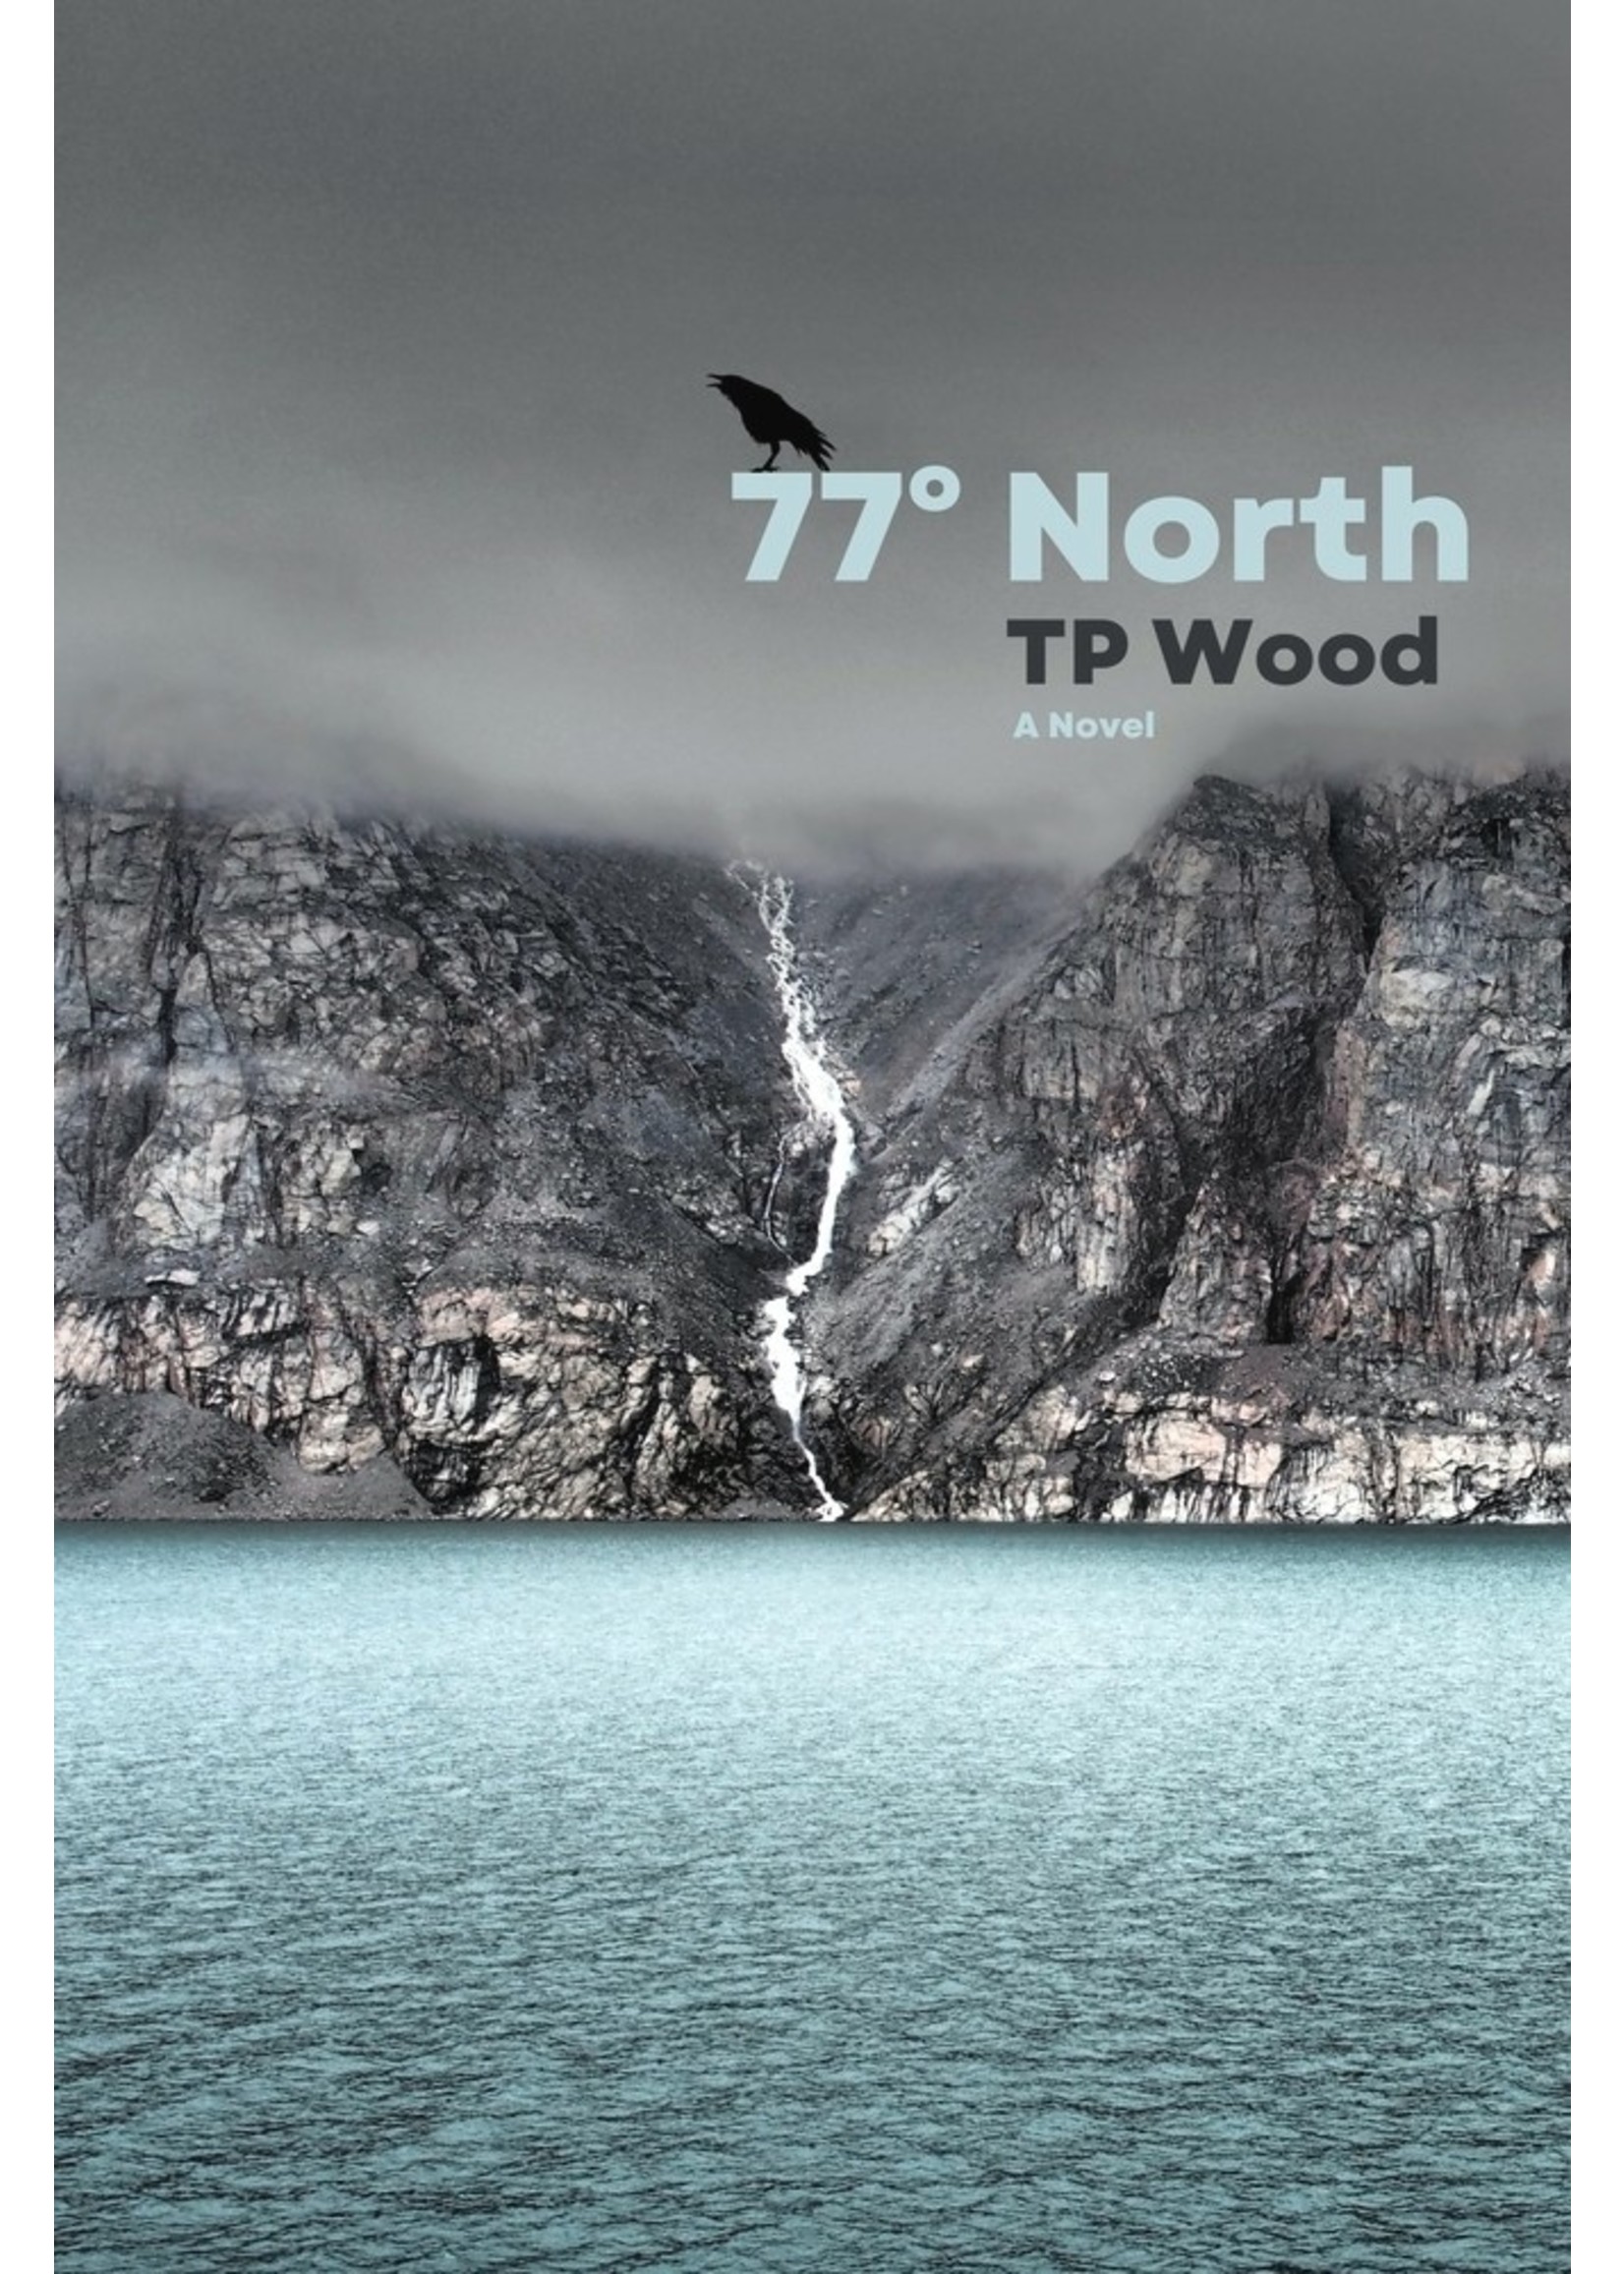 77° North by TP Wood